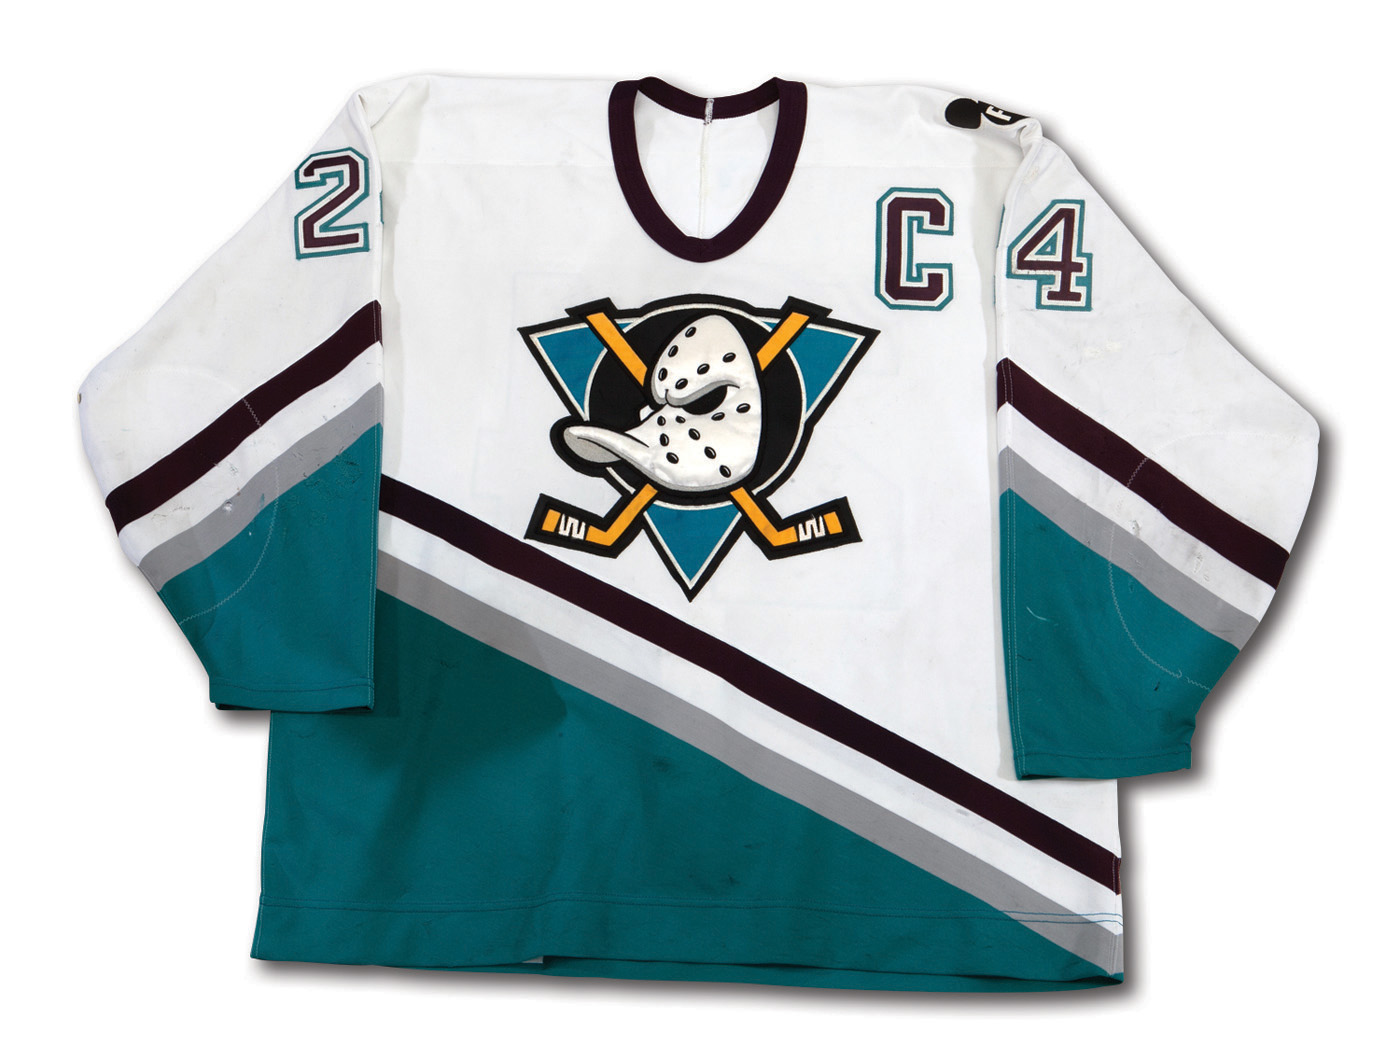 New LARGE Mighty Ducks Jersey1993 Mighty Ducks Jersey 90s 